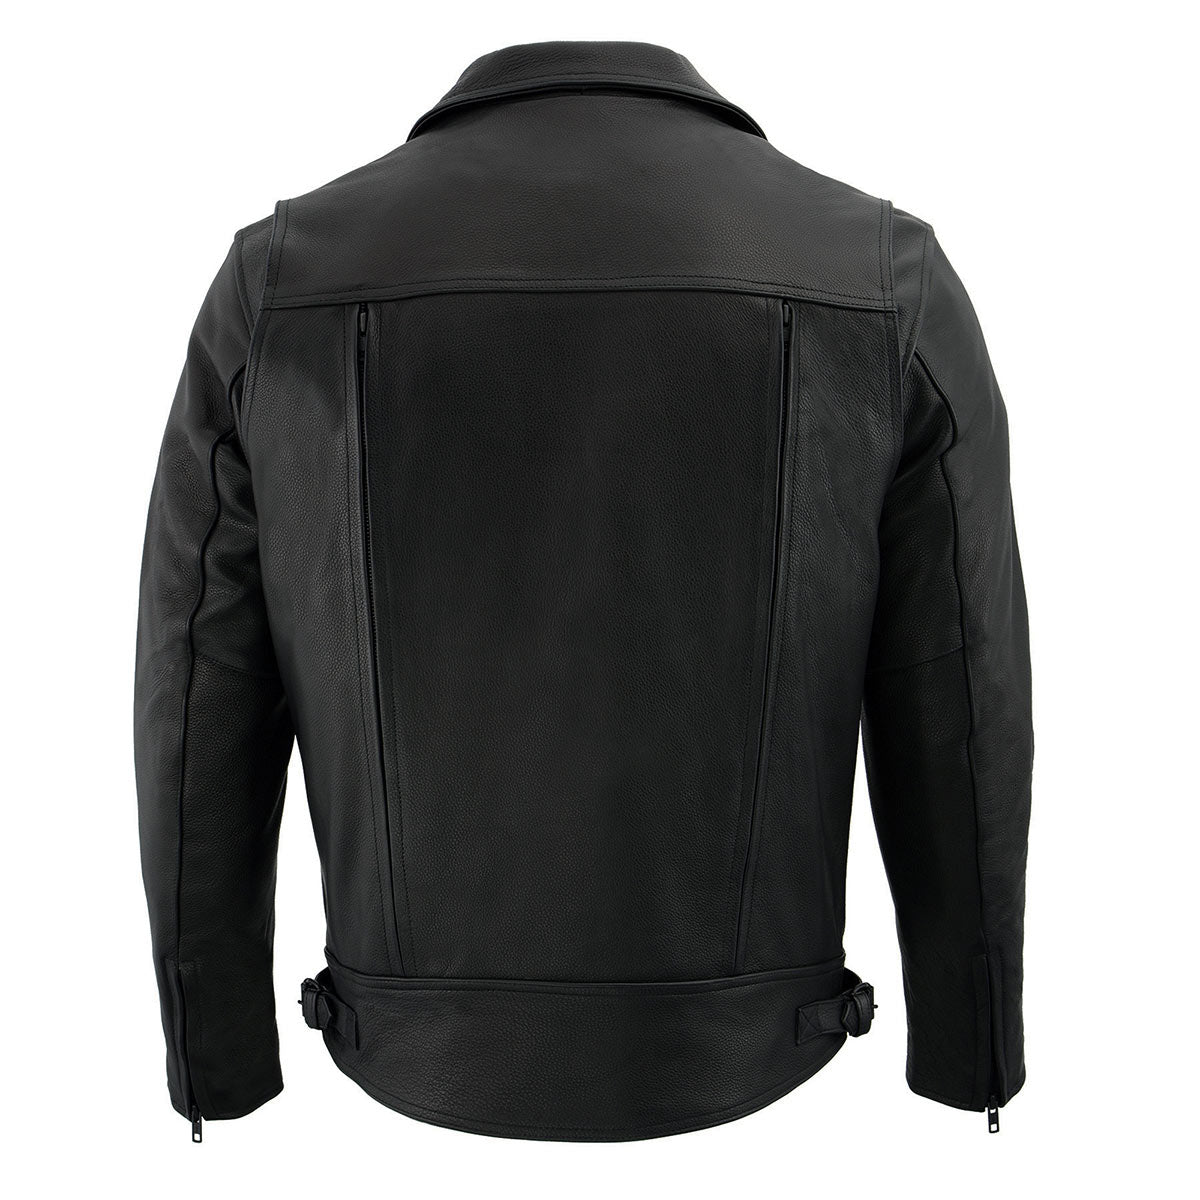 Milwaukee Leather LKM1720T Men's Black 'Pistol Pete' Motorcycle Vented Leather Jacket with Utility Pockets-Tall Sizes